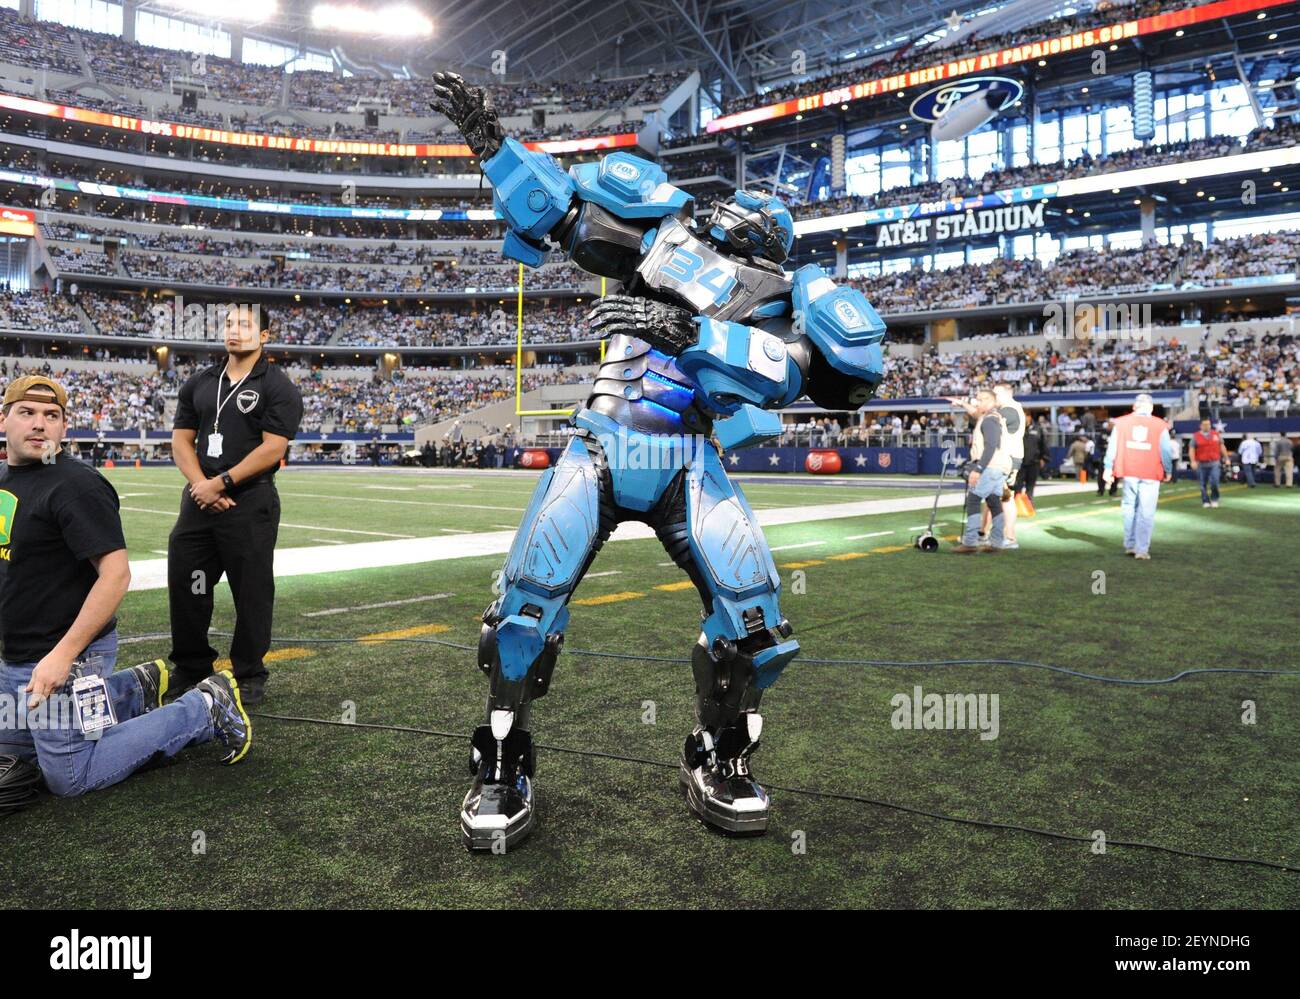 December 15, 2013: The Fox Robot makes an appearance during an NFL football  game between the Green Bay Packers and the Dallas Cowboys at AT&T Stadium  in Arlington, TX Green Bay defeated